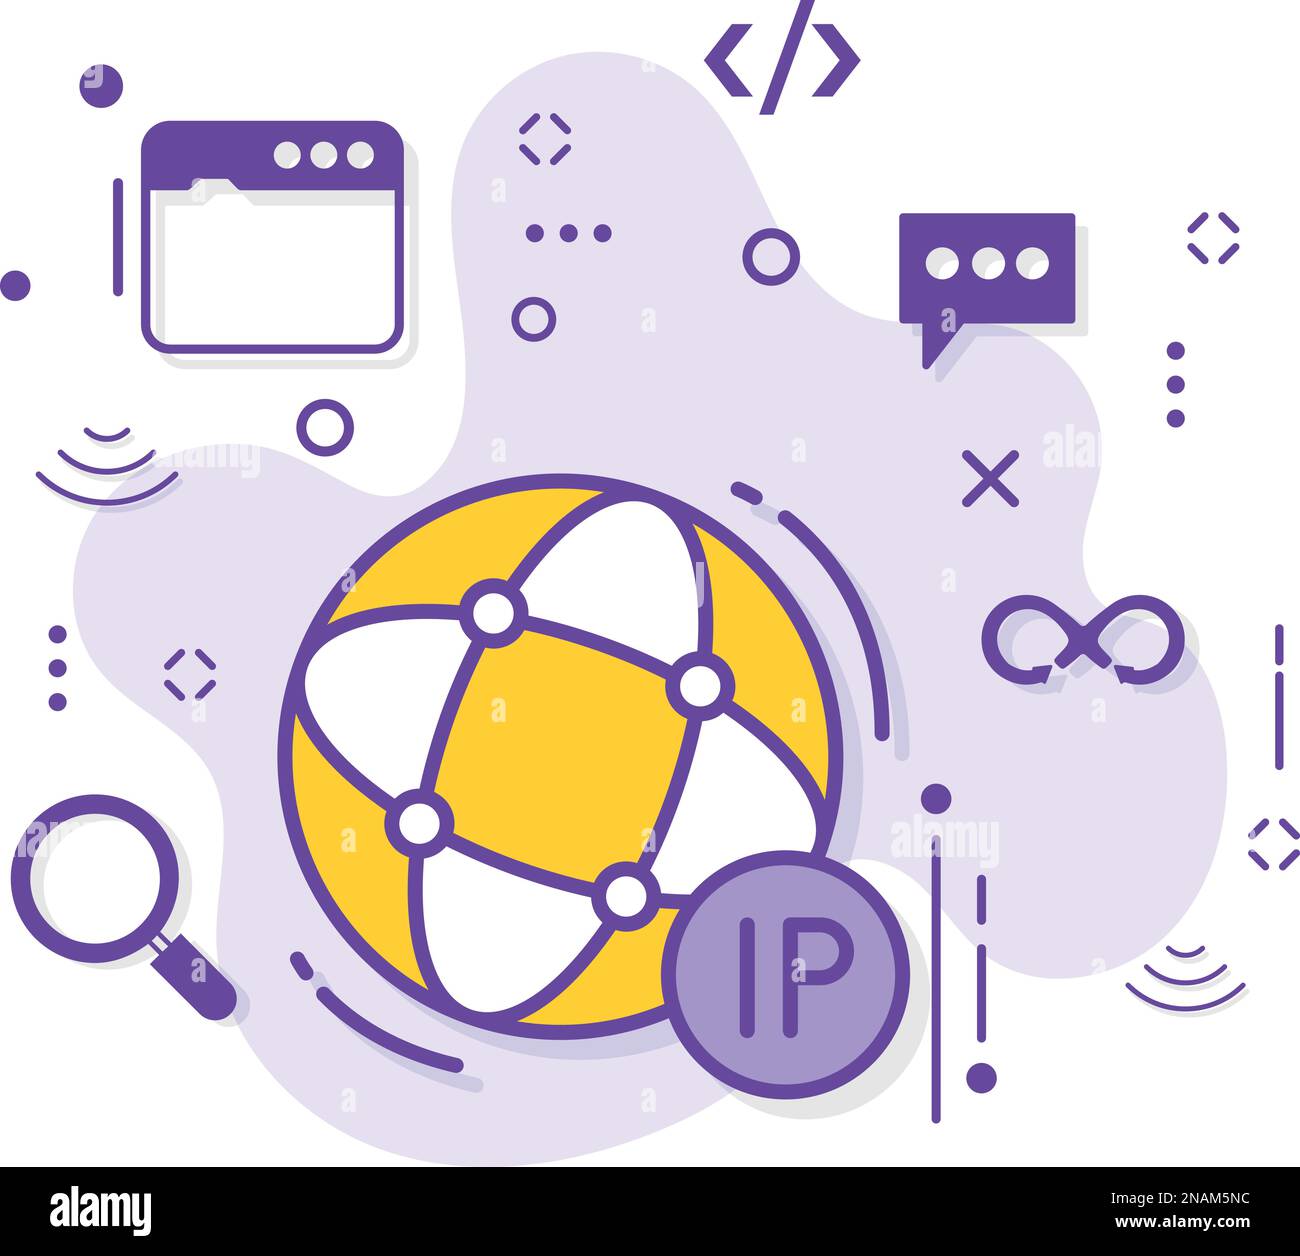 IPv4 and IPv6 stock illustration, IPSec TLS Sign, Internet Protocol address Concept, Sticky dynamic IP color Vector Icon Design, Cloud computing Stock Vector